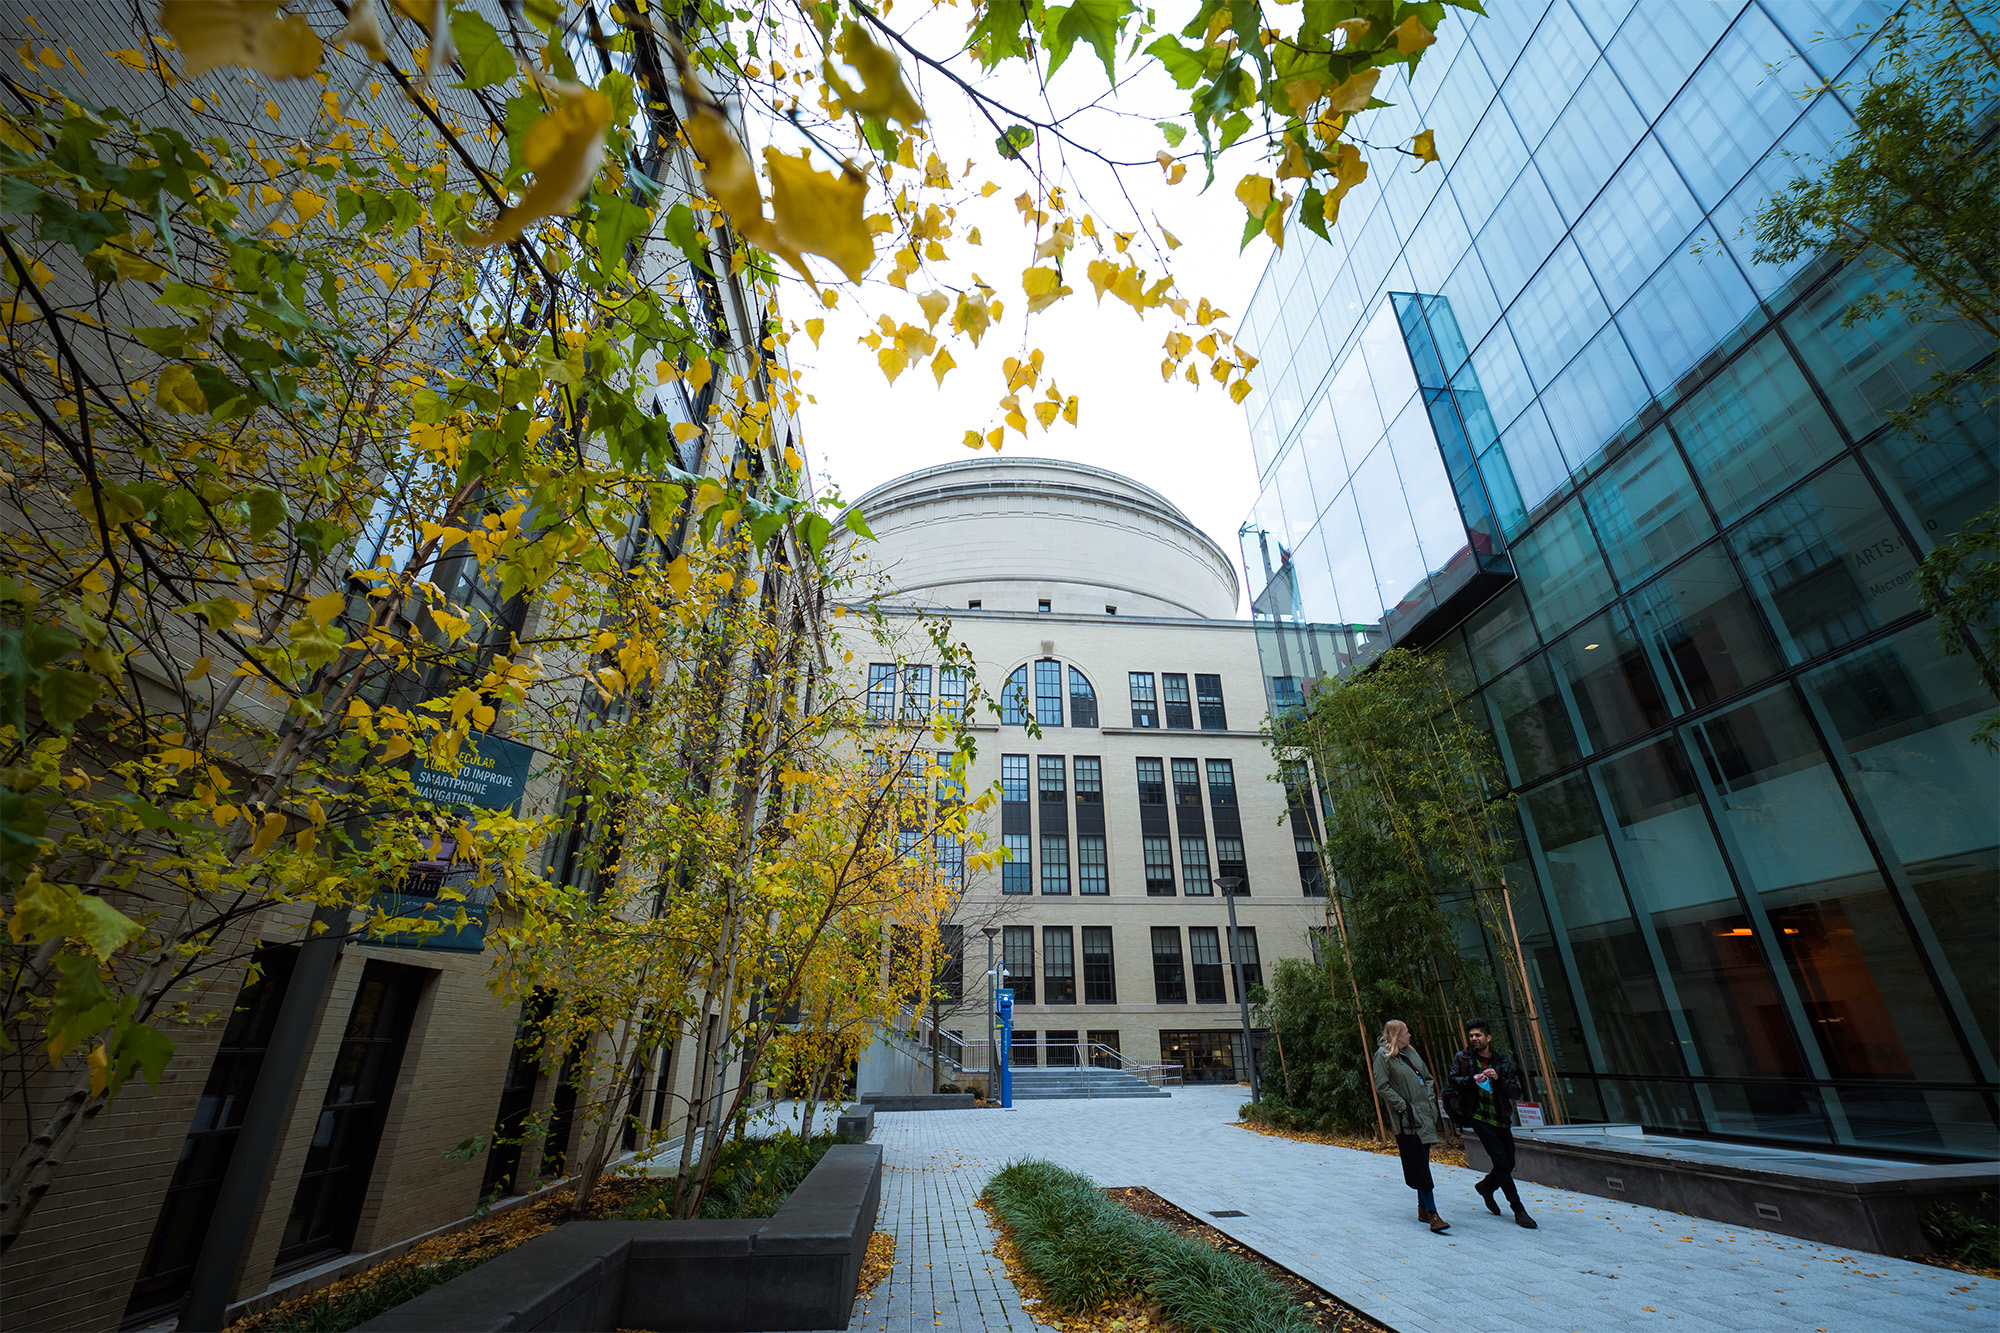 MIT plans to make significant investments next fiscal year to support the Institute community.